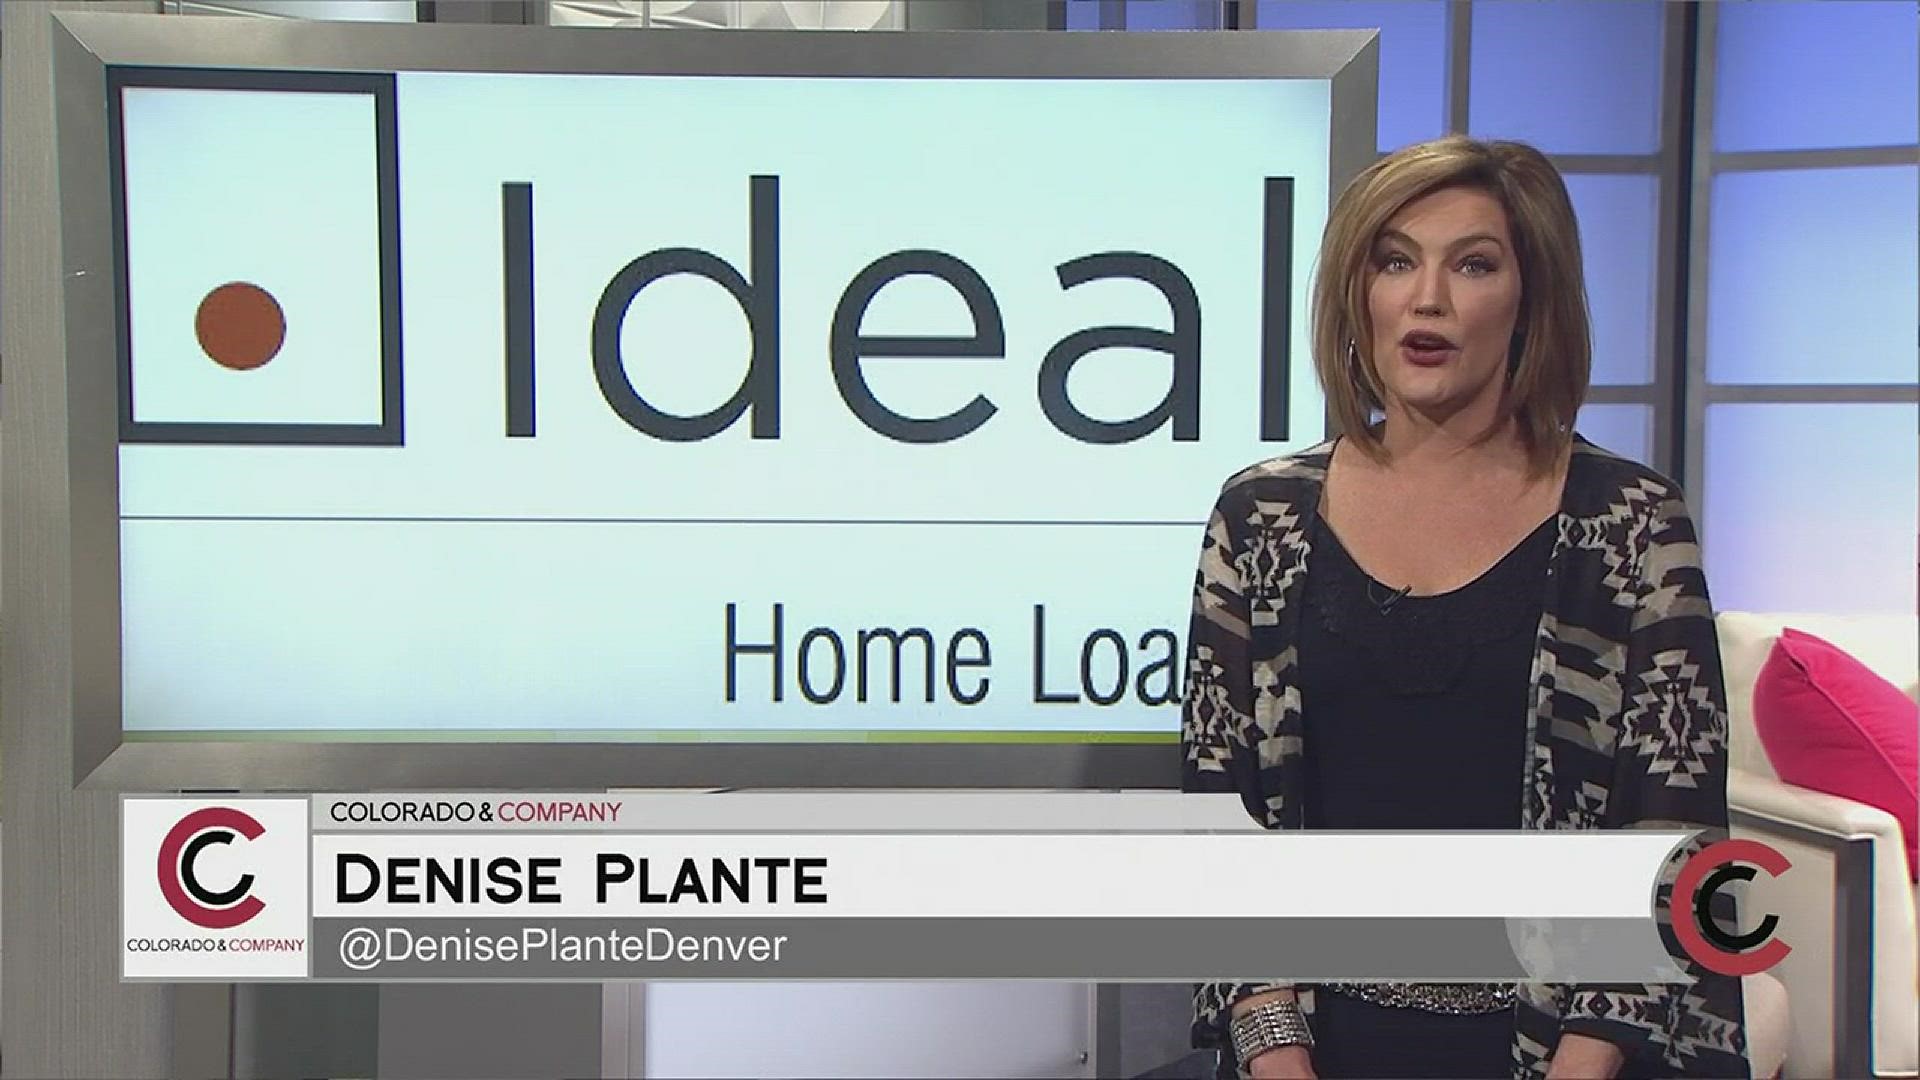 Take advantage of Ideal Home Loans’ free home mortgage consultation. Your first payment won’t be due until May! Their philosophy is “First we listen, then we lend.” Get started today by calling 303.867.7000, or online at www.IdealHomeLoans.com.
THIS INTERVIEW HAS COMMERCIAL CONTENT. PRODUCTS AND SERVICES FEATURED APPEAR AS PAID ADVERTISING.